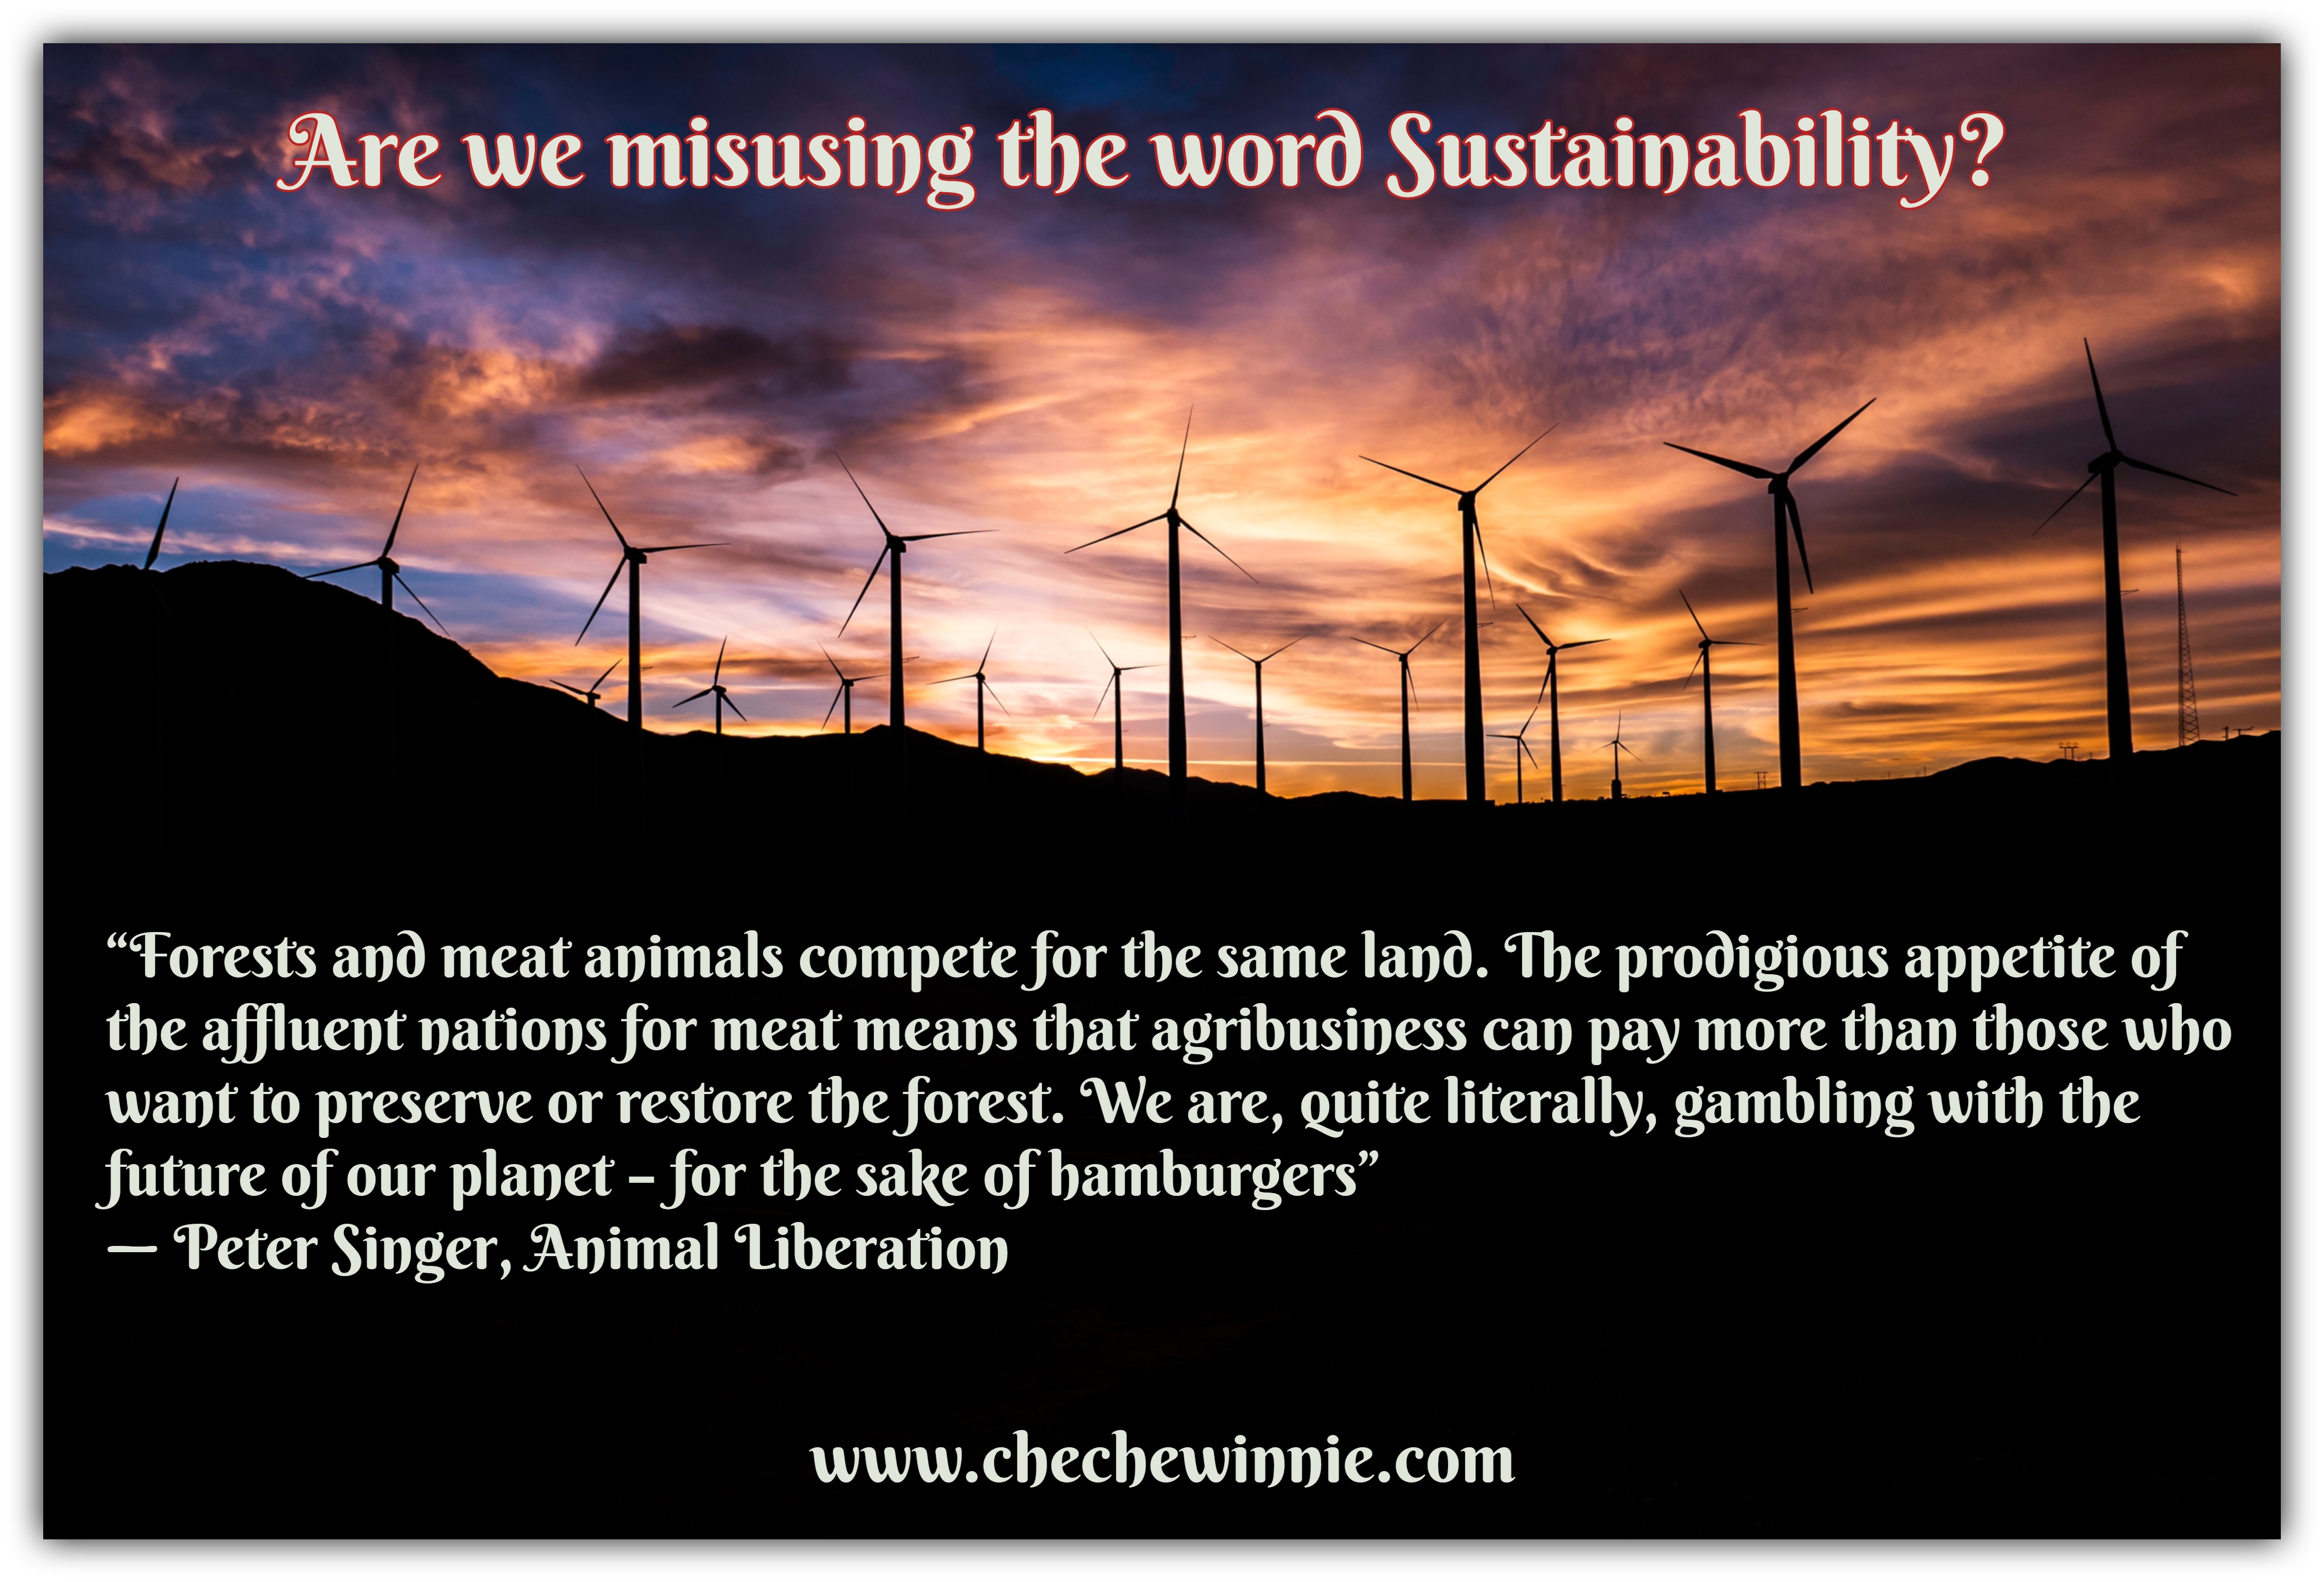 Are we misusing the word Sustainability?